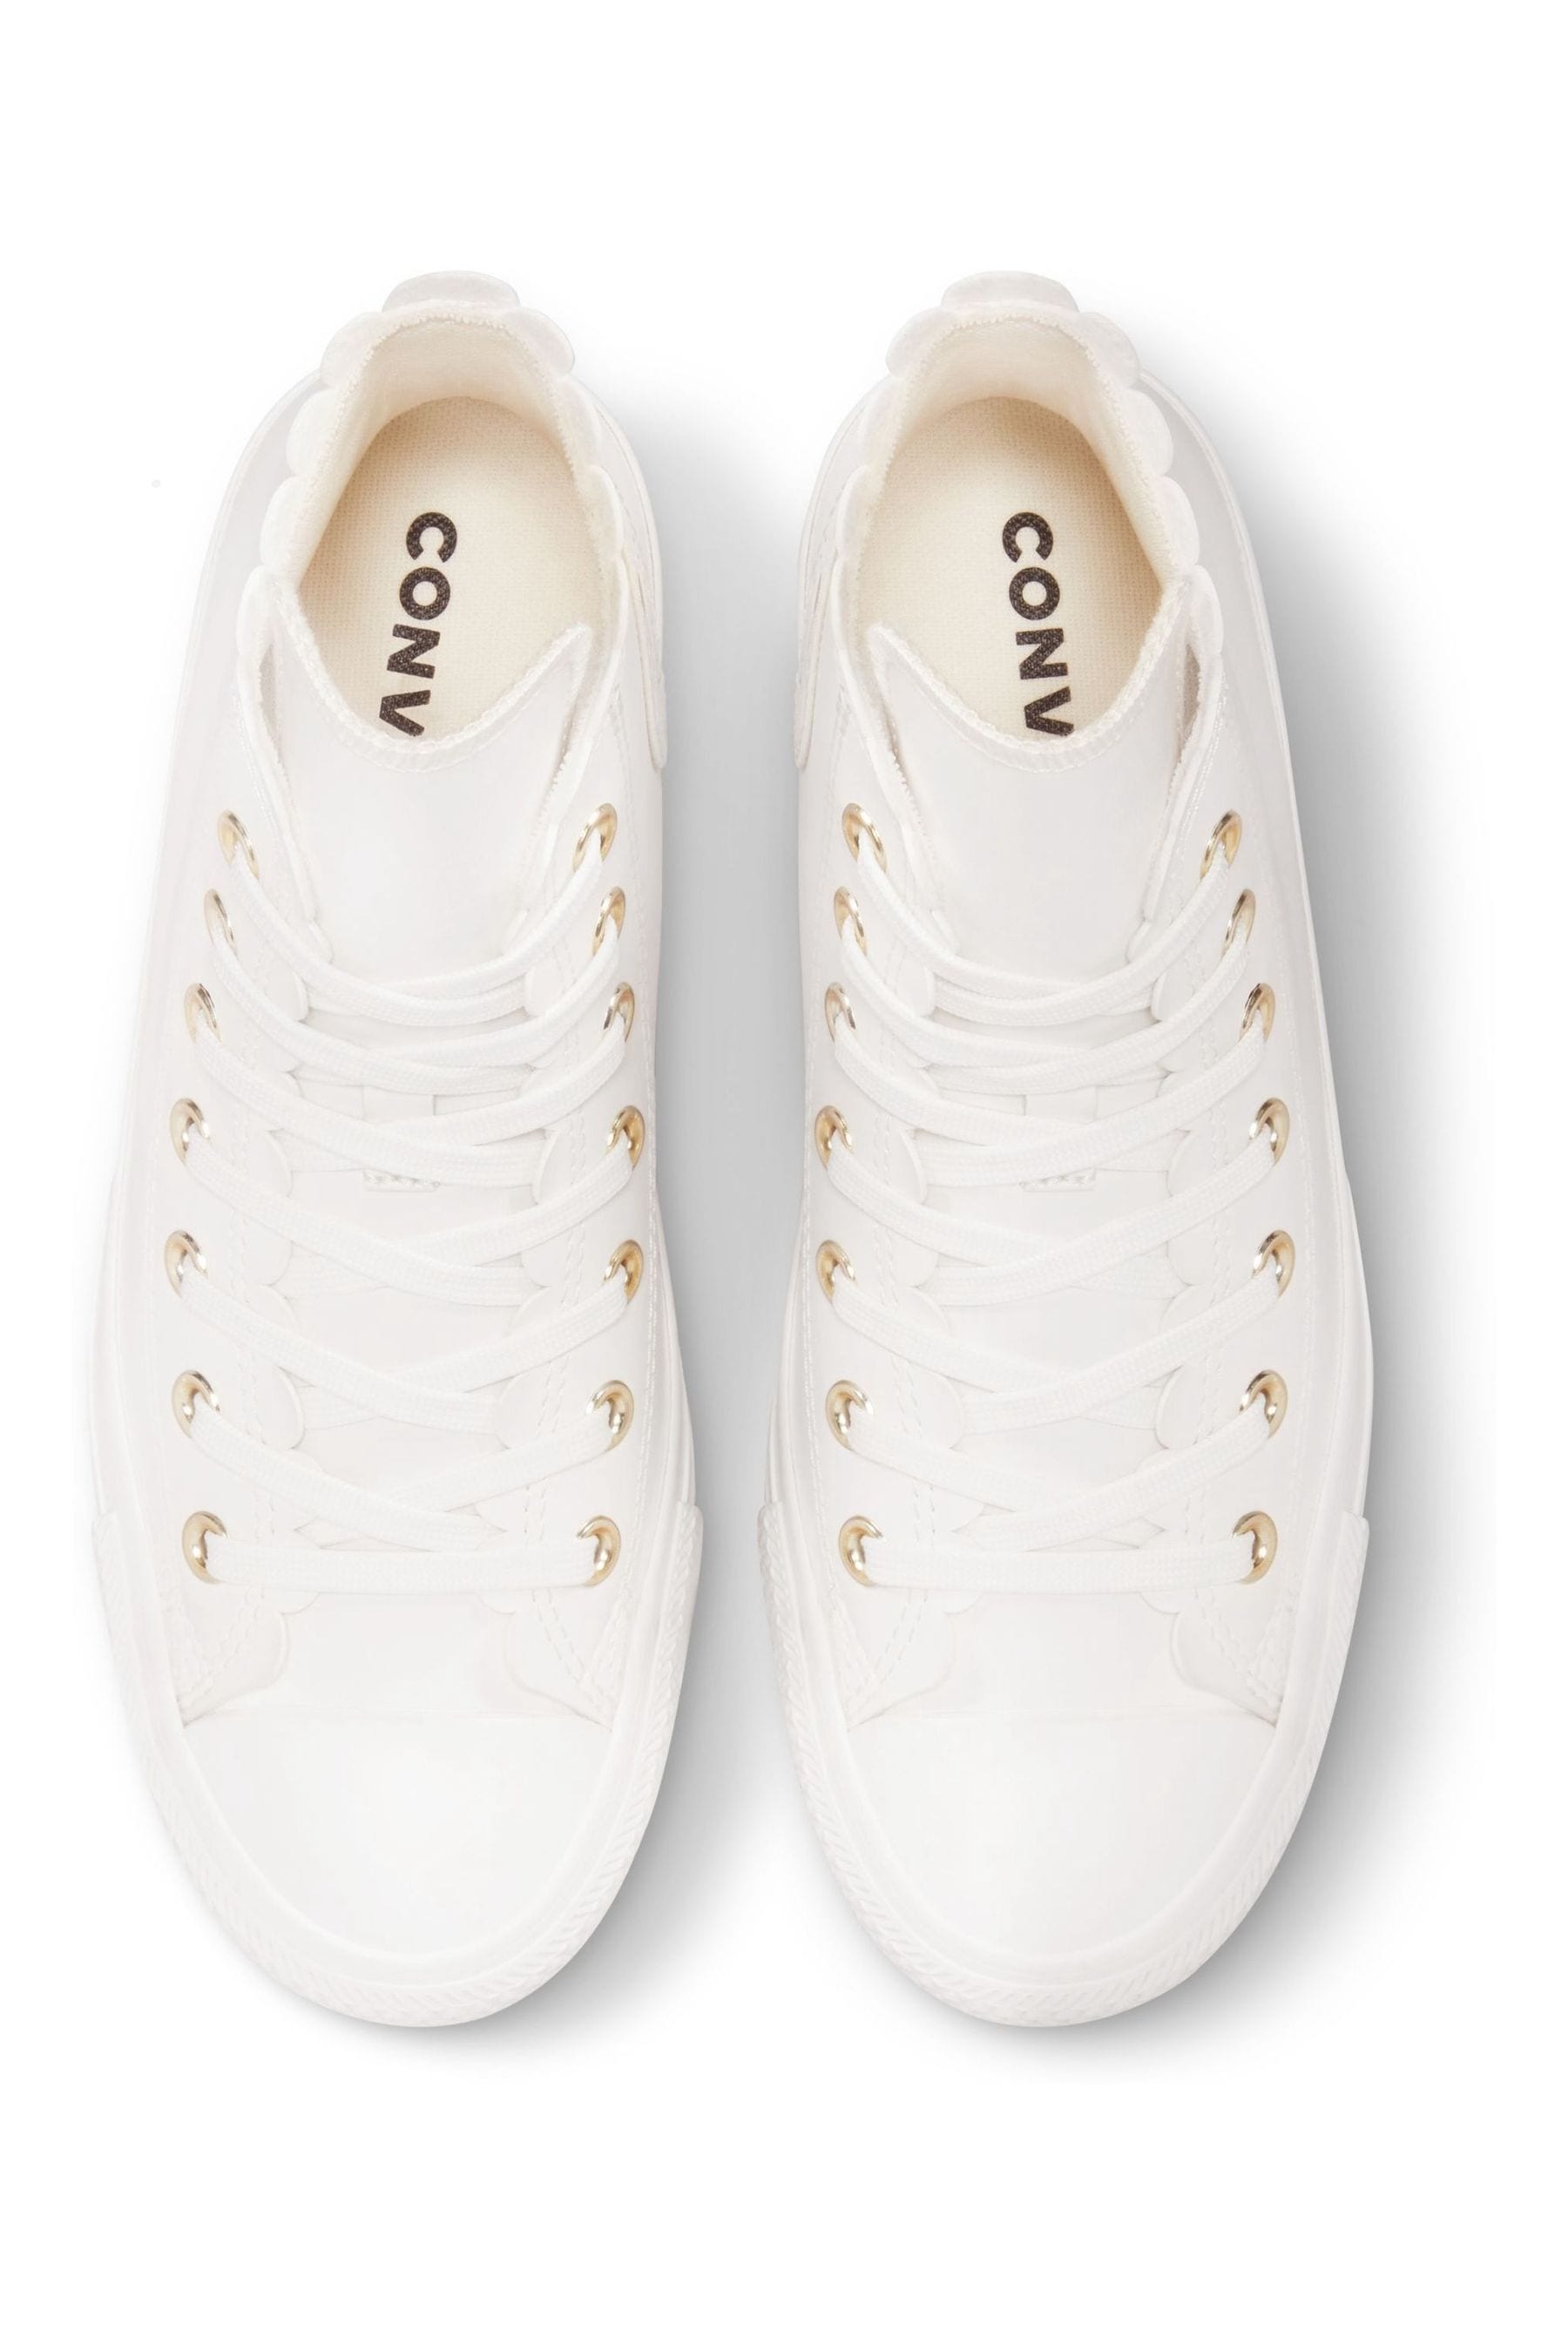 Buy Converse White Scallop High Top Trainers from the Next UK online shop